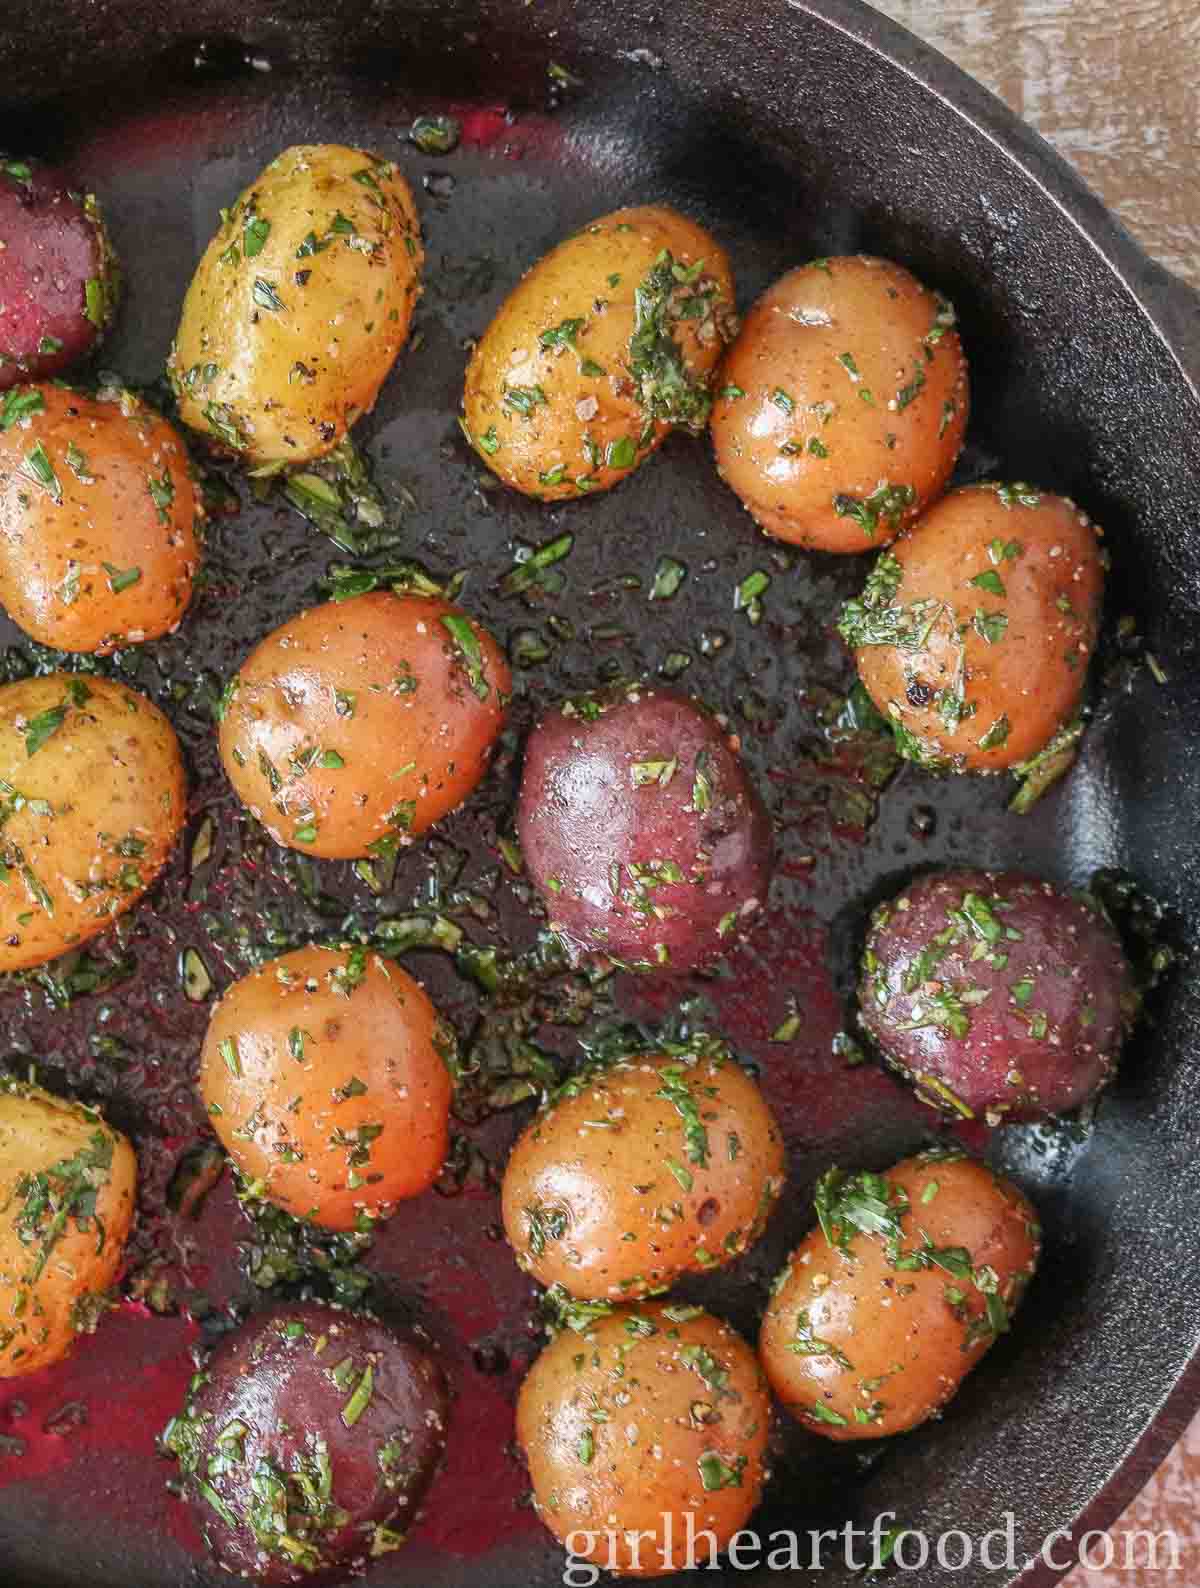 Baby potatoes with herbs in a cast-iron skillet before being roasted.